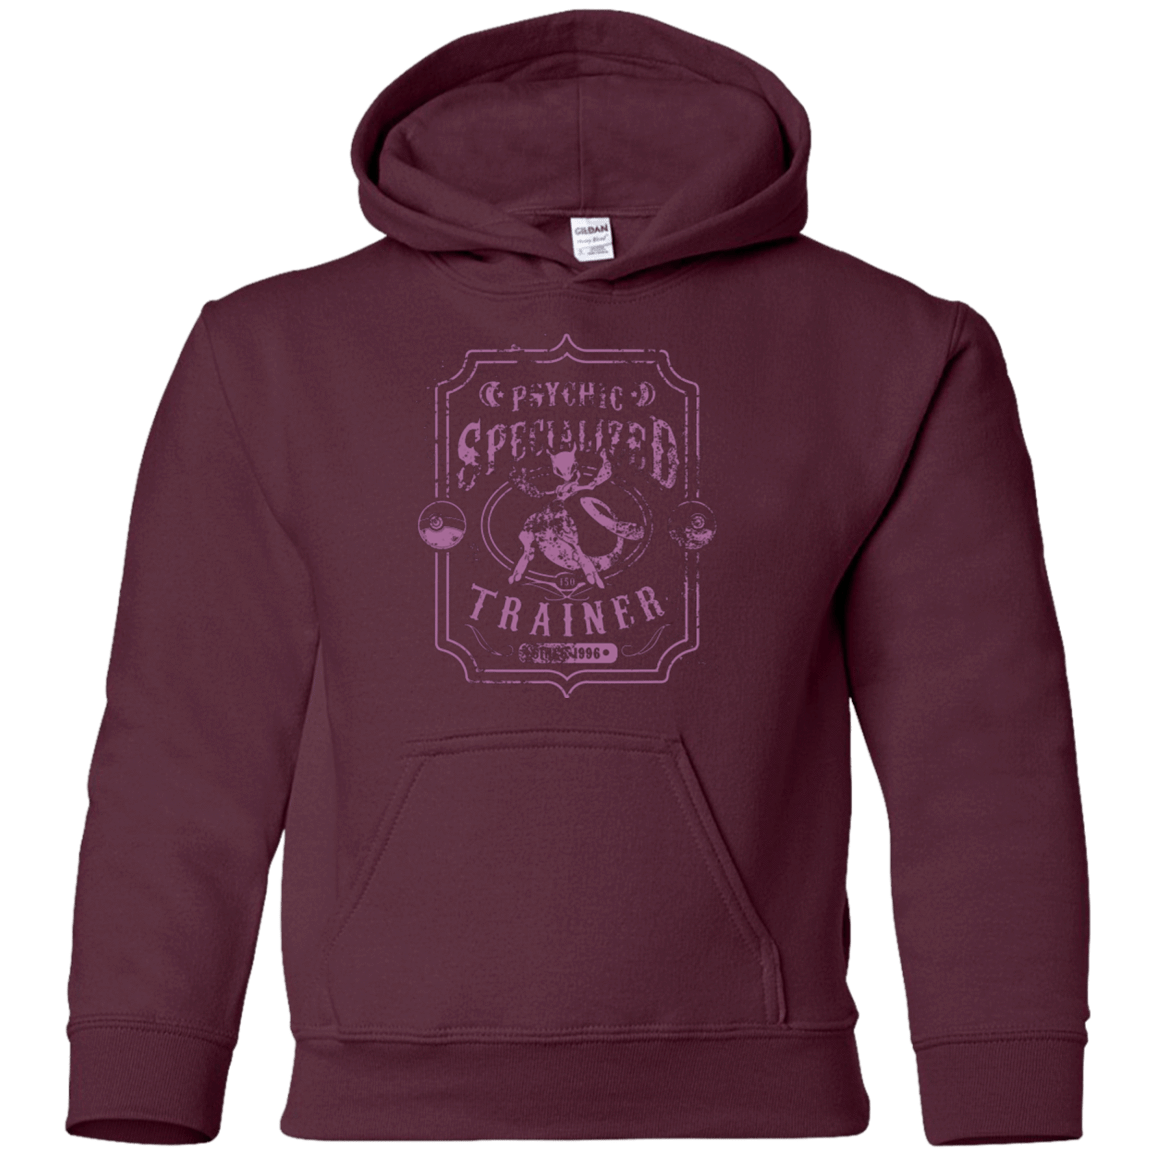 Sweatshirts Maroon / YS Psychic Specialized Trainer 2 Youth Hoodie